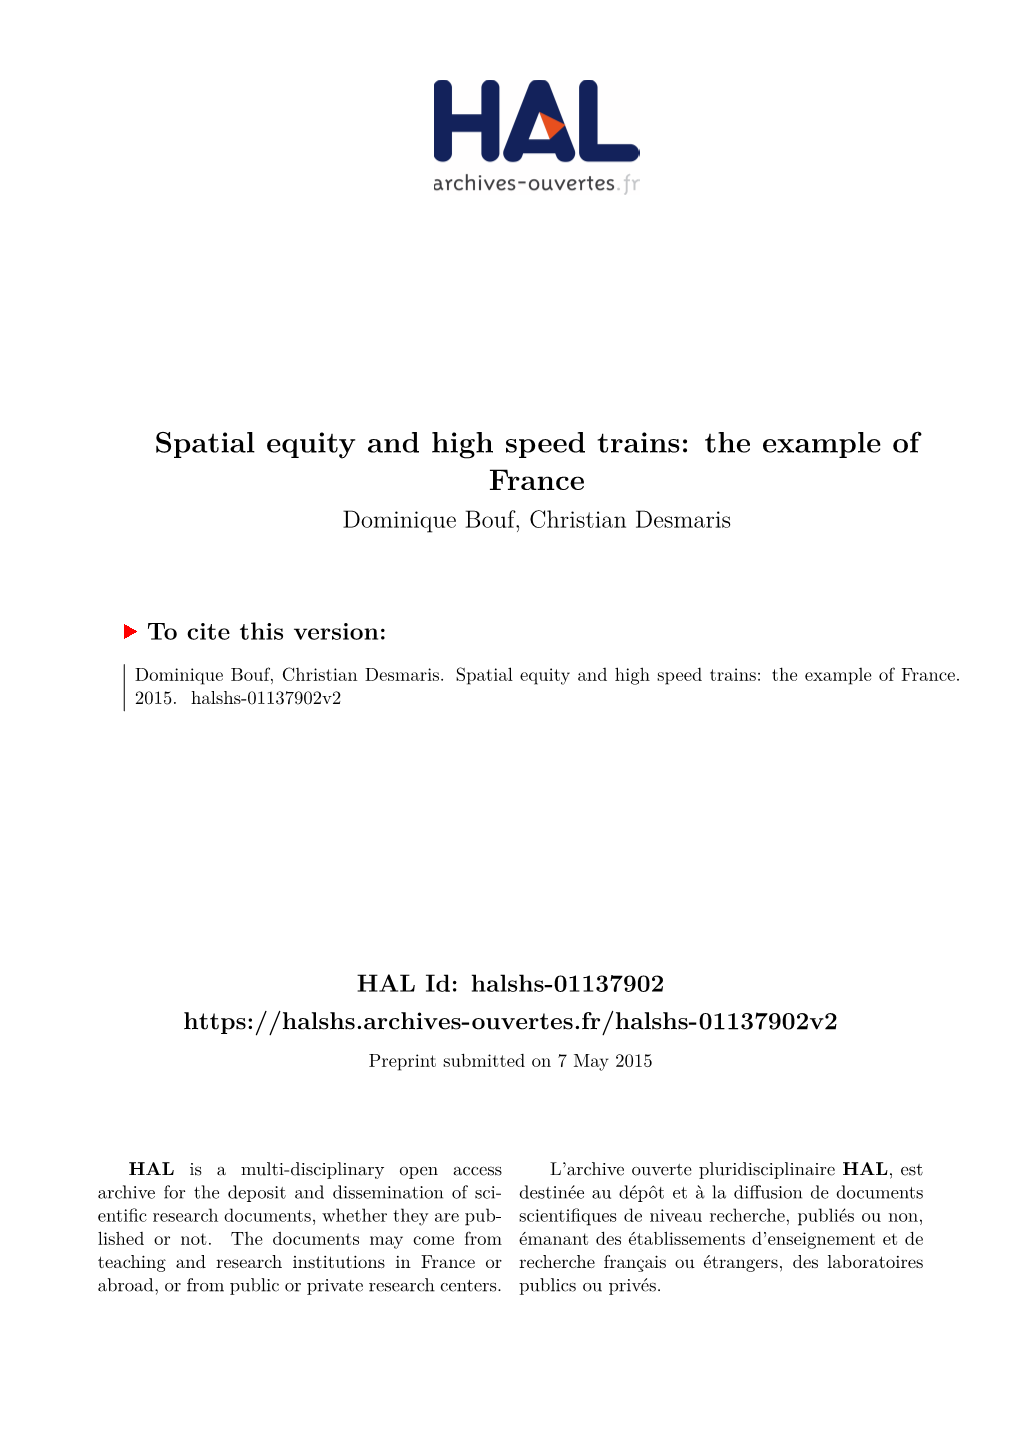 Spatial Equity and High Speed Trains: the Example of France Dominique Bouf, Christian Desmaris